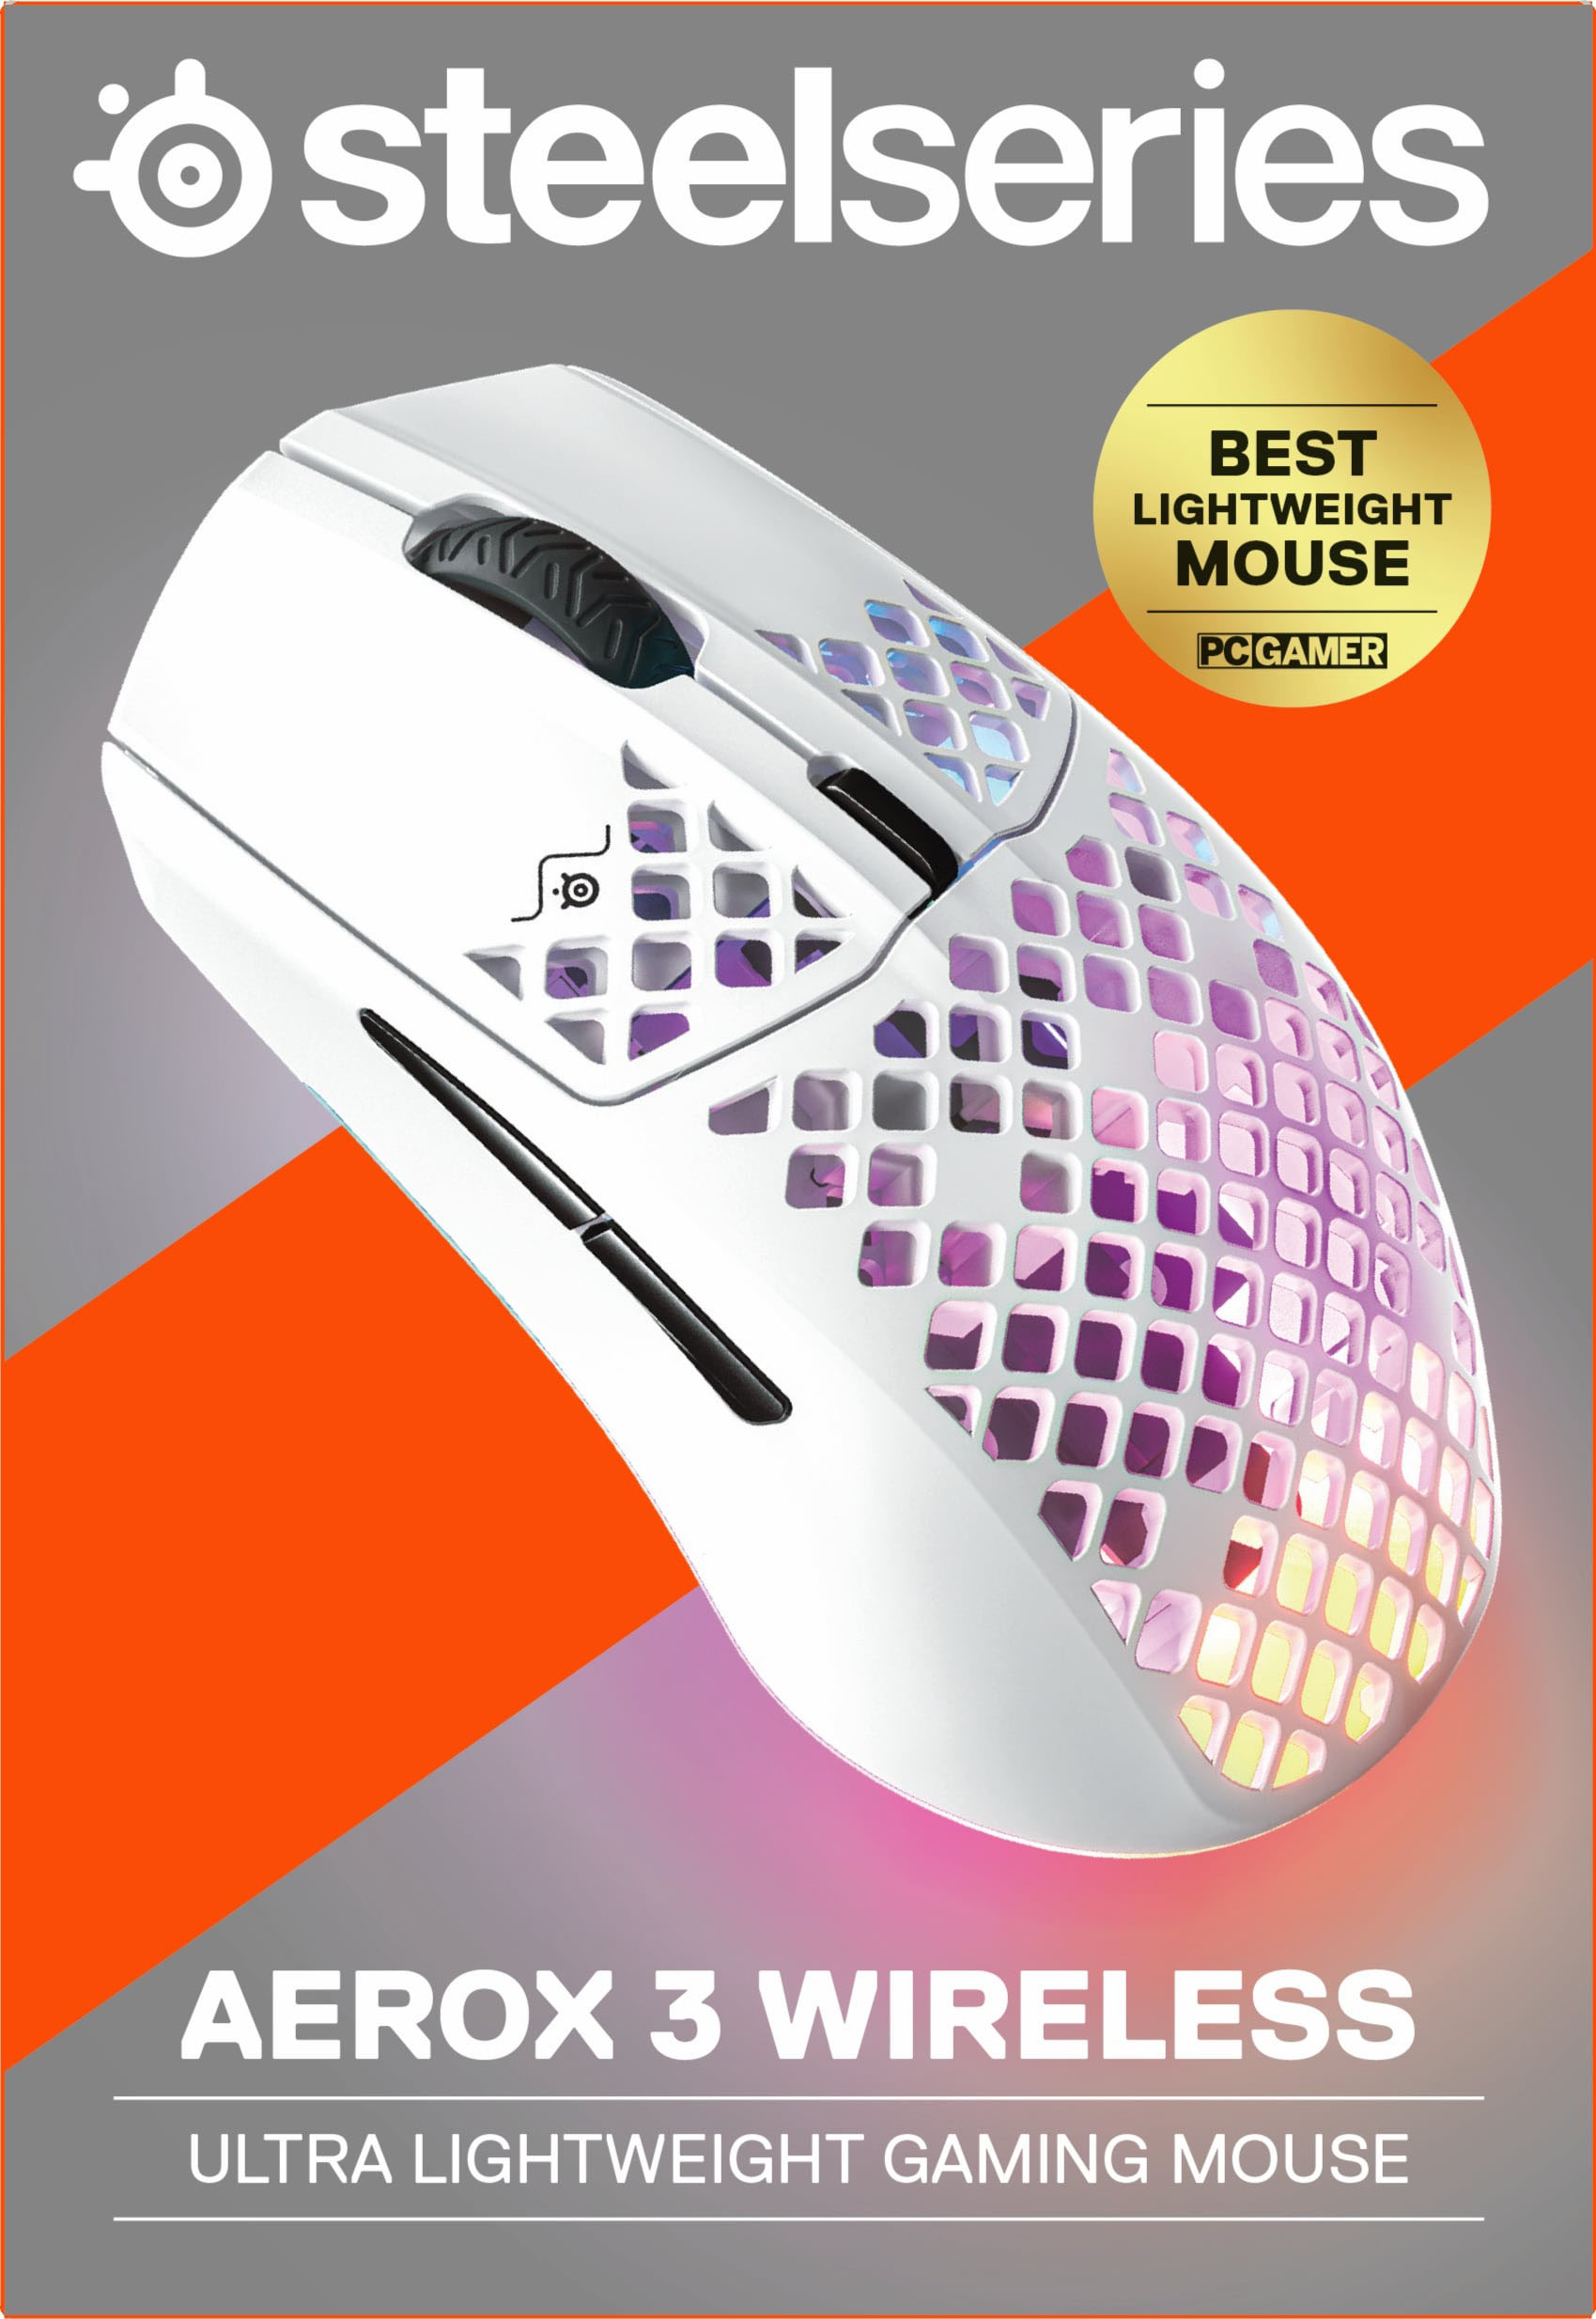 SteelSeries Aerox Light 62608 Mouse RGB Optical Gaming - 3 Snow Best Buy Super Wireless Honeycomb